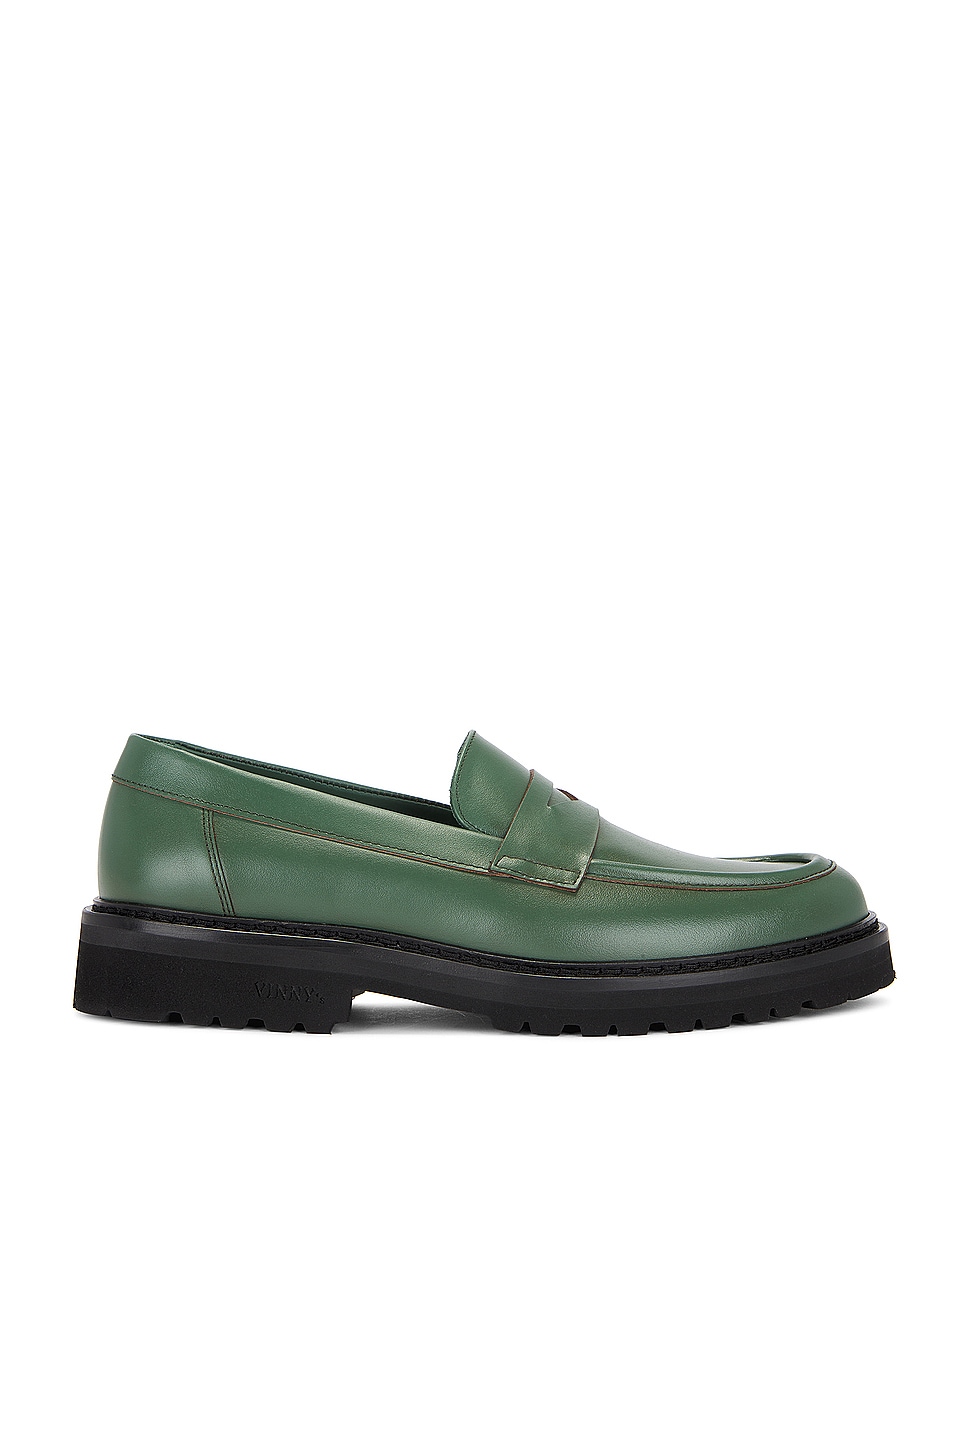 Image 1 of Vinny's Richee Penny Loafer in Leather Green